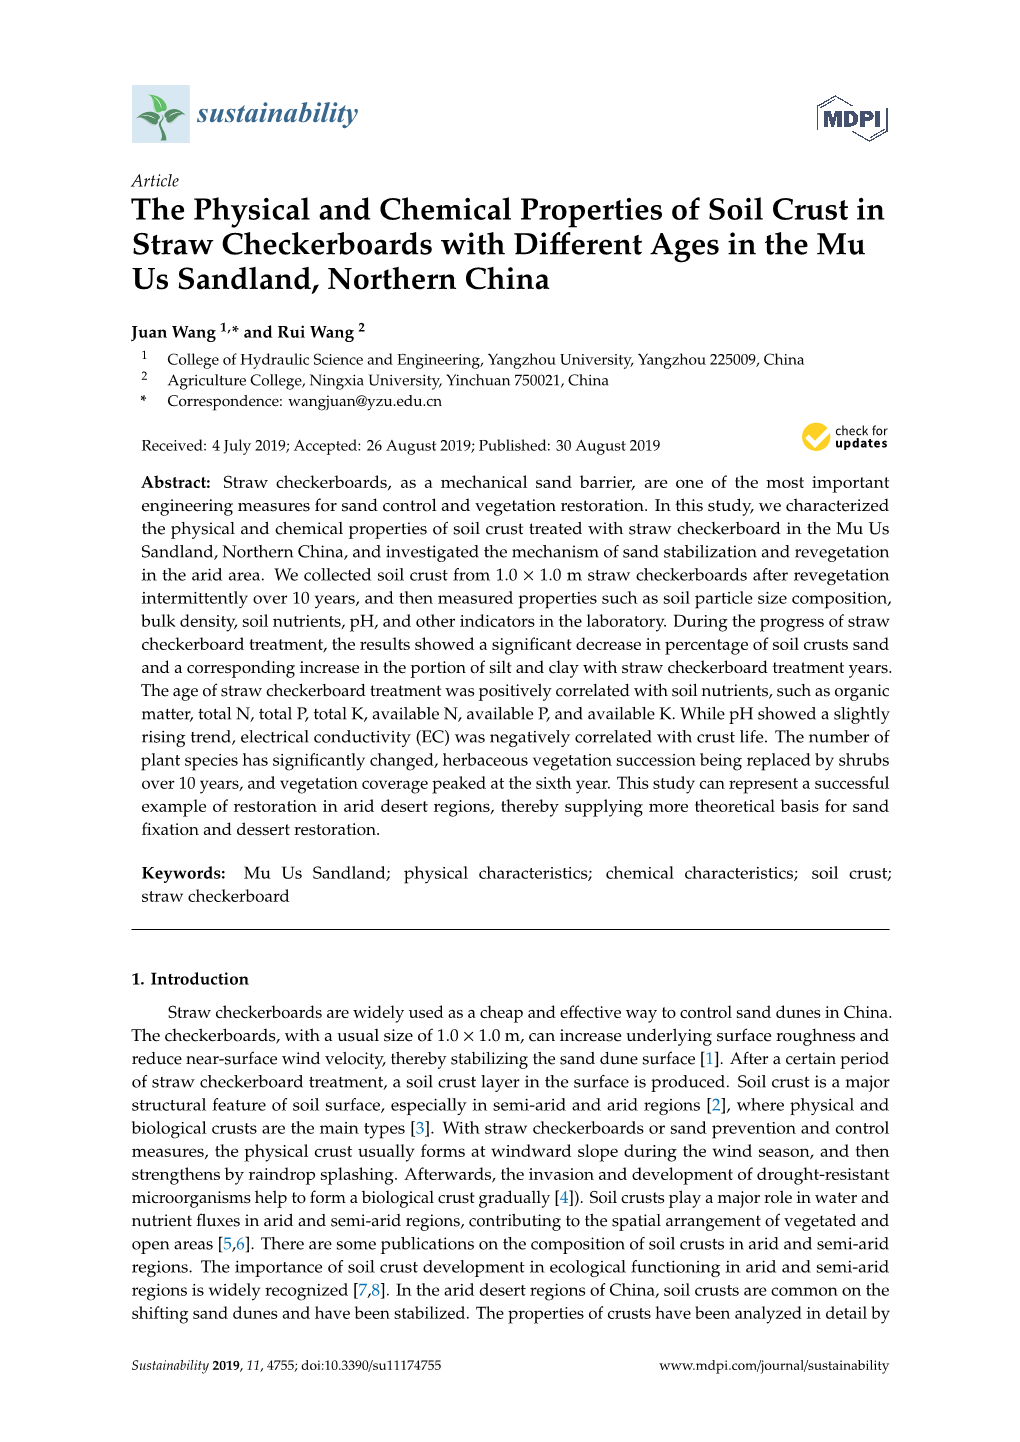 The Physical and Chemical Properties of Soil Crust in Straw Checkerboards with Diﬀerent Ages in the Mu Us Sandland, Northern China